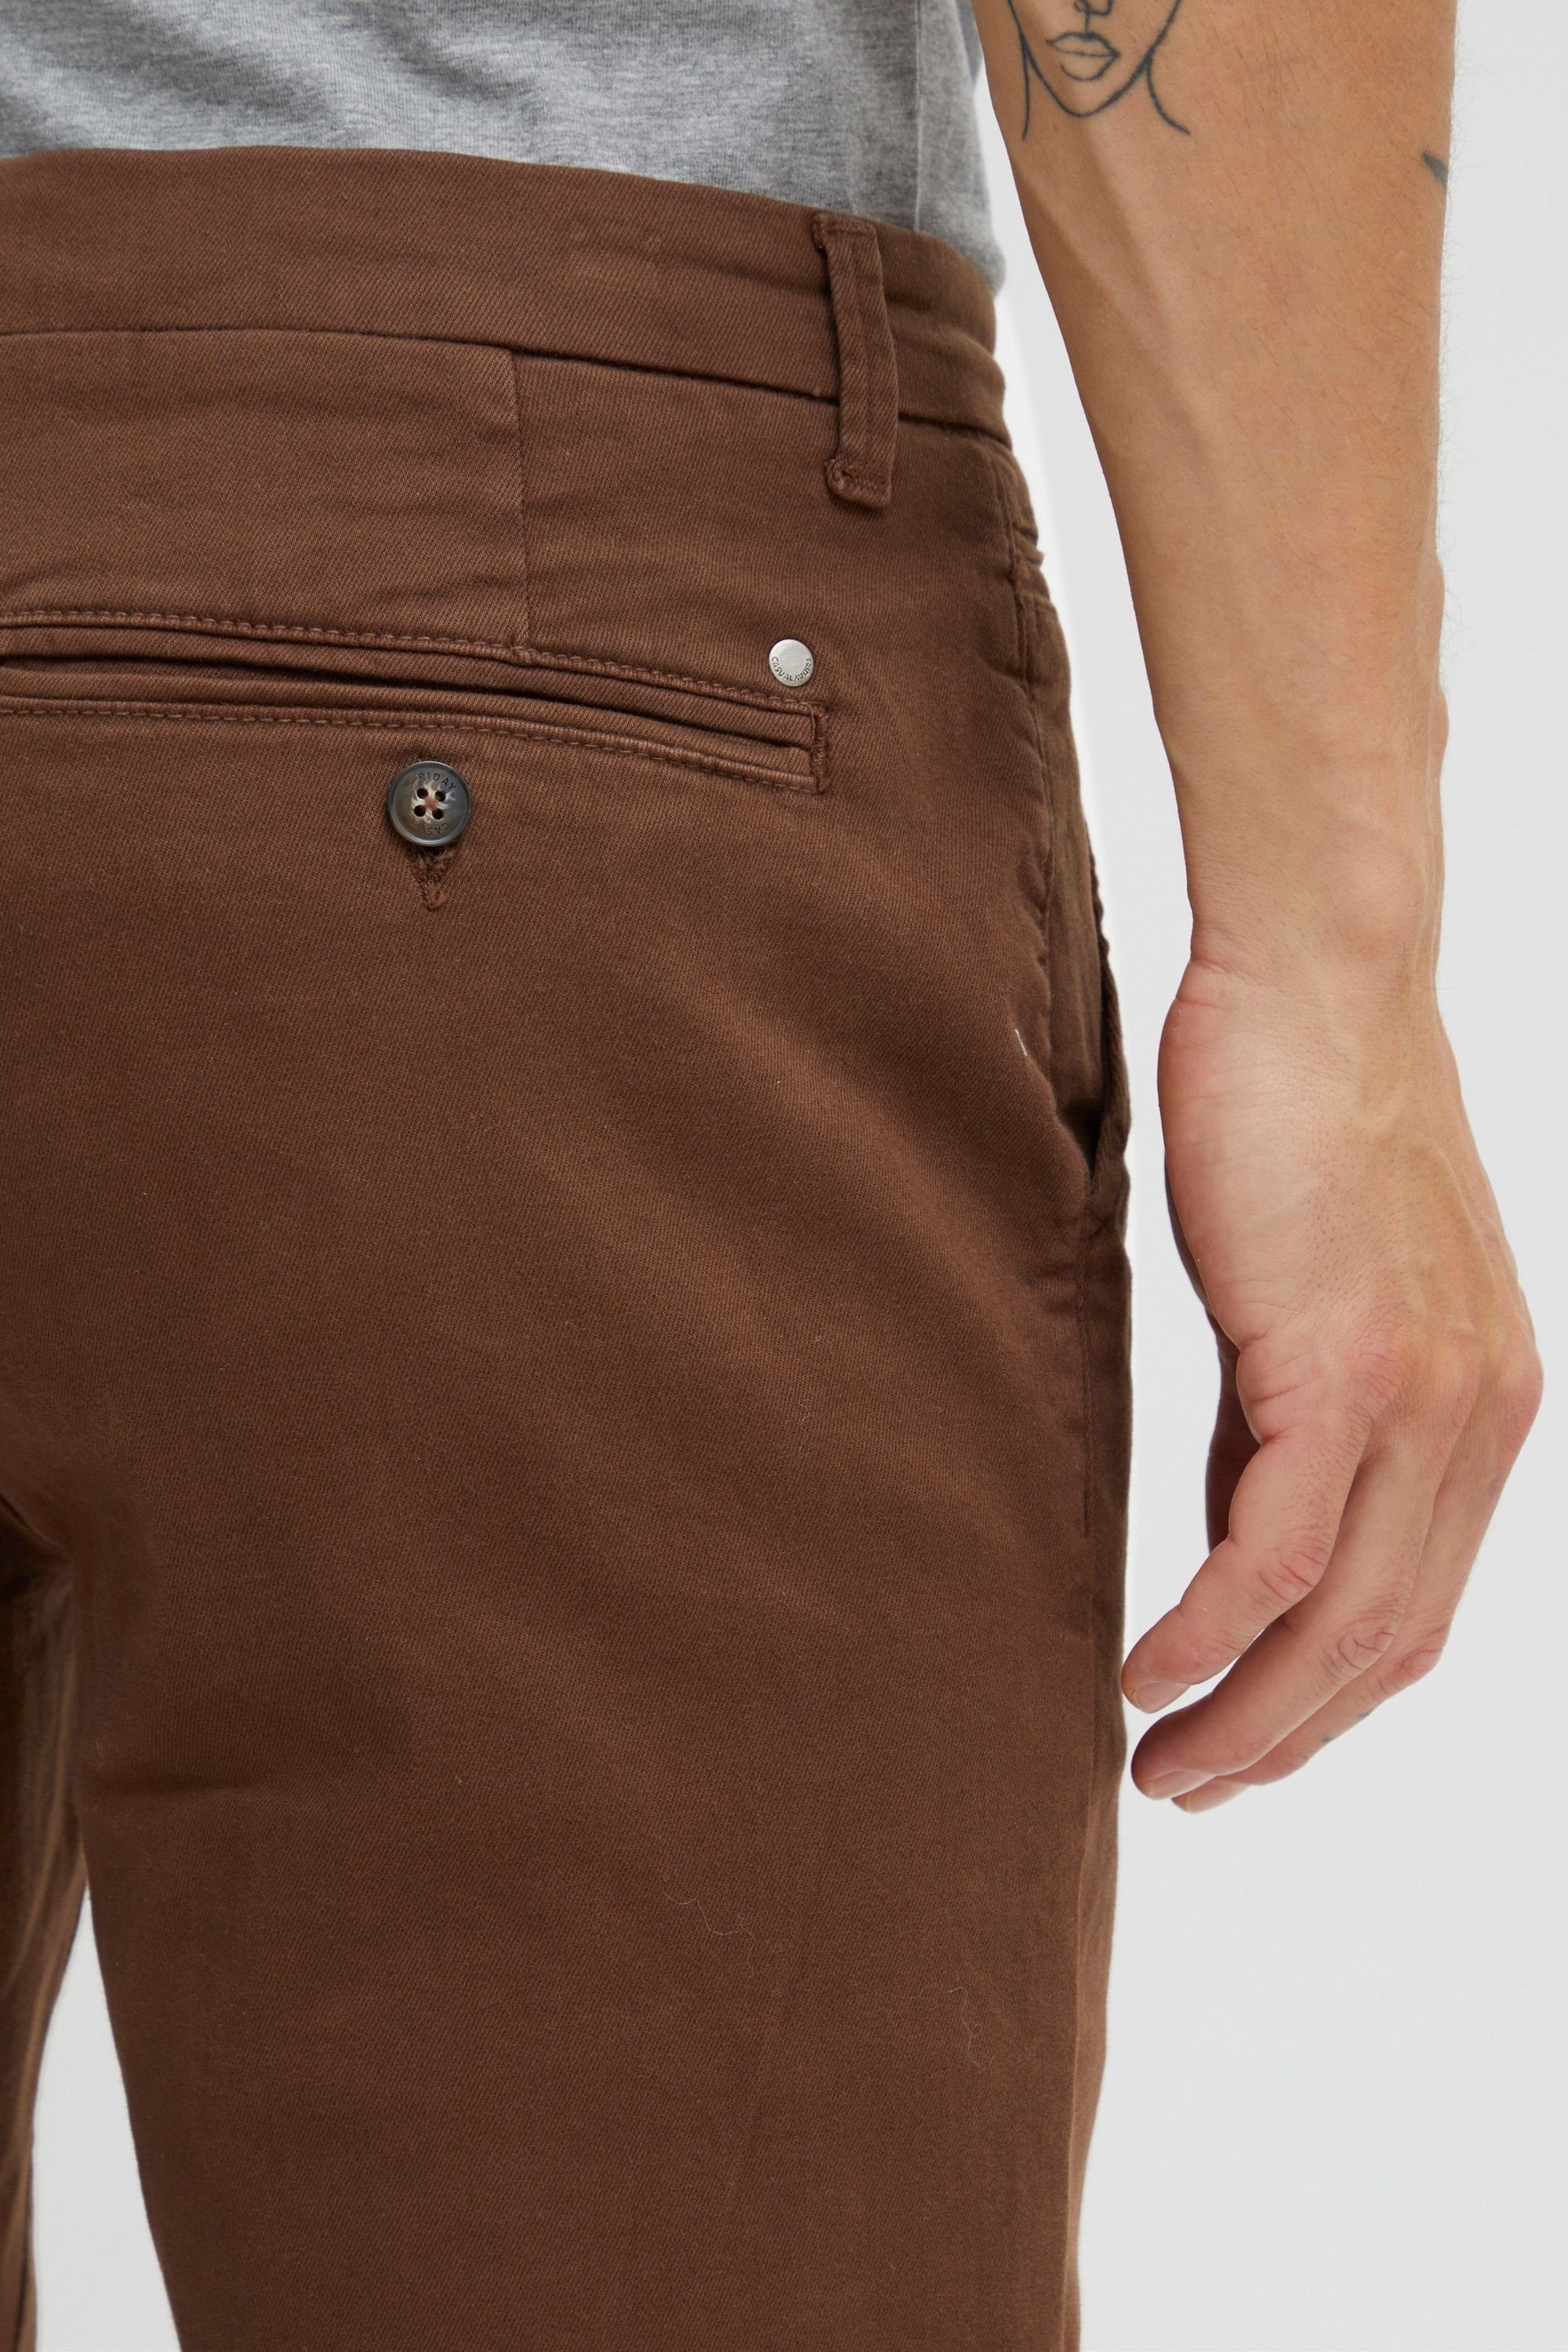 Phil 20504239 Chinohose Soil Potting chino performance Casual high (191218) Friday